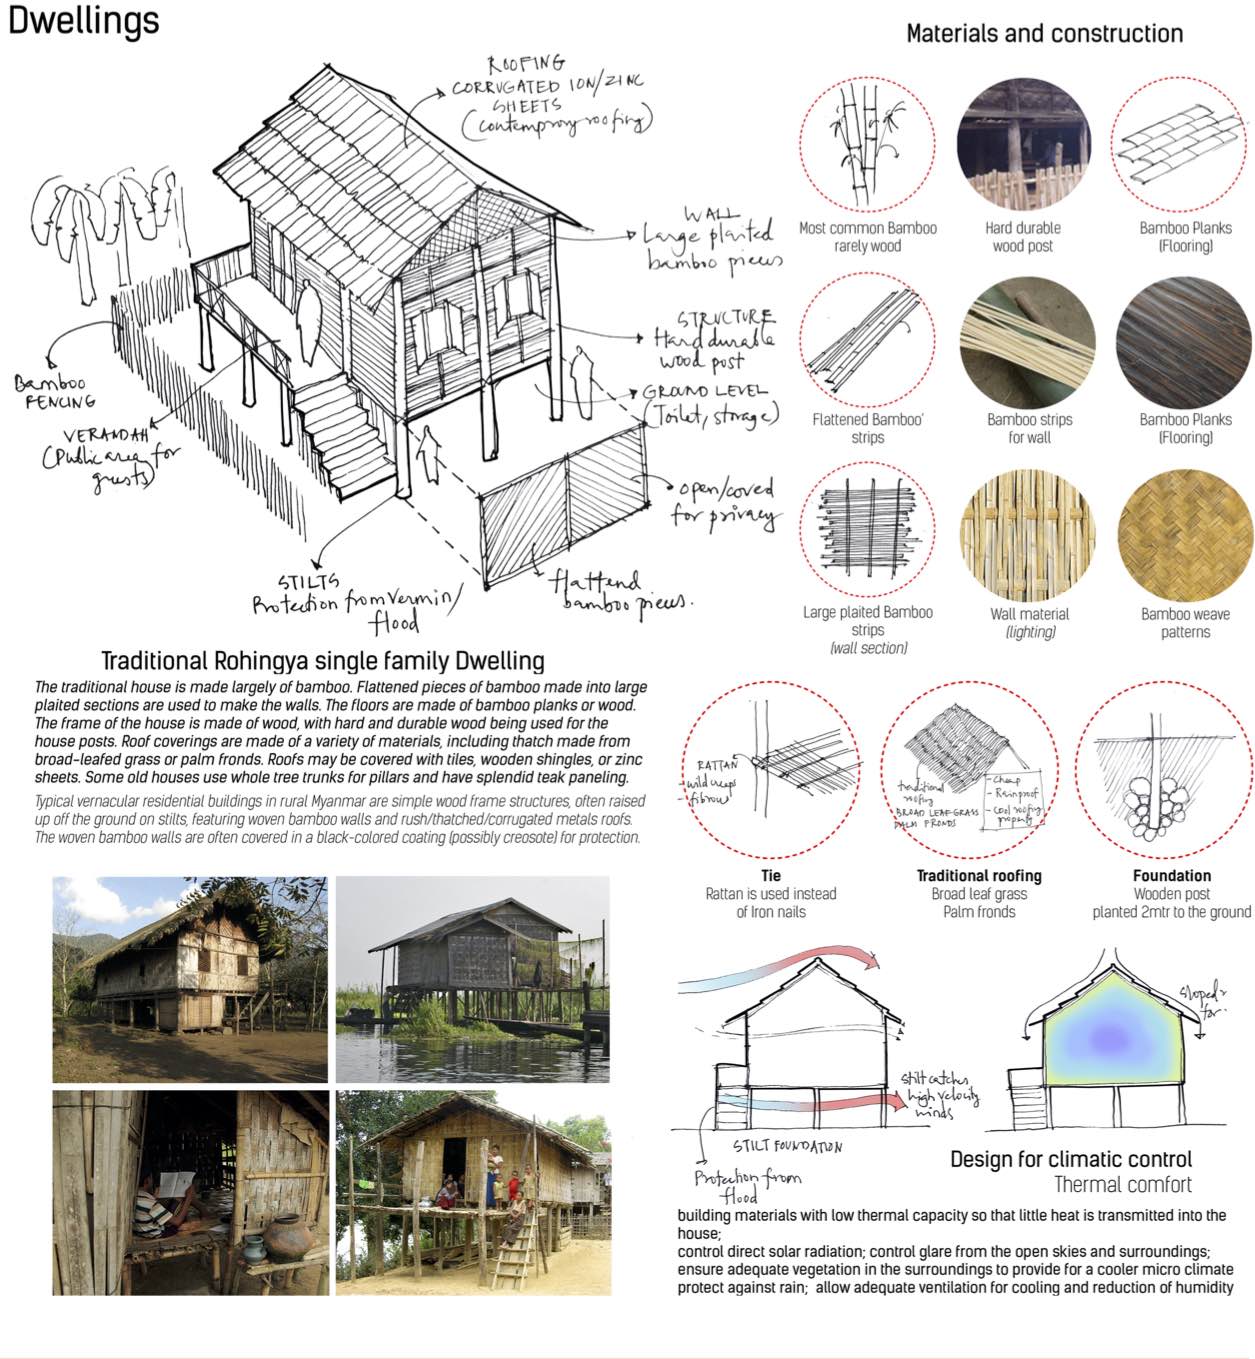 The Importance of the Section in Architectural Representation and